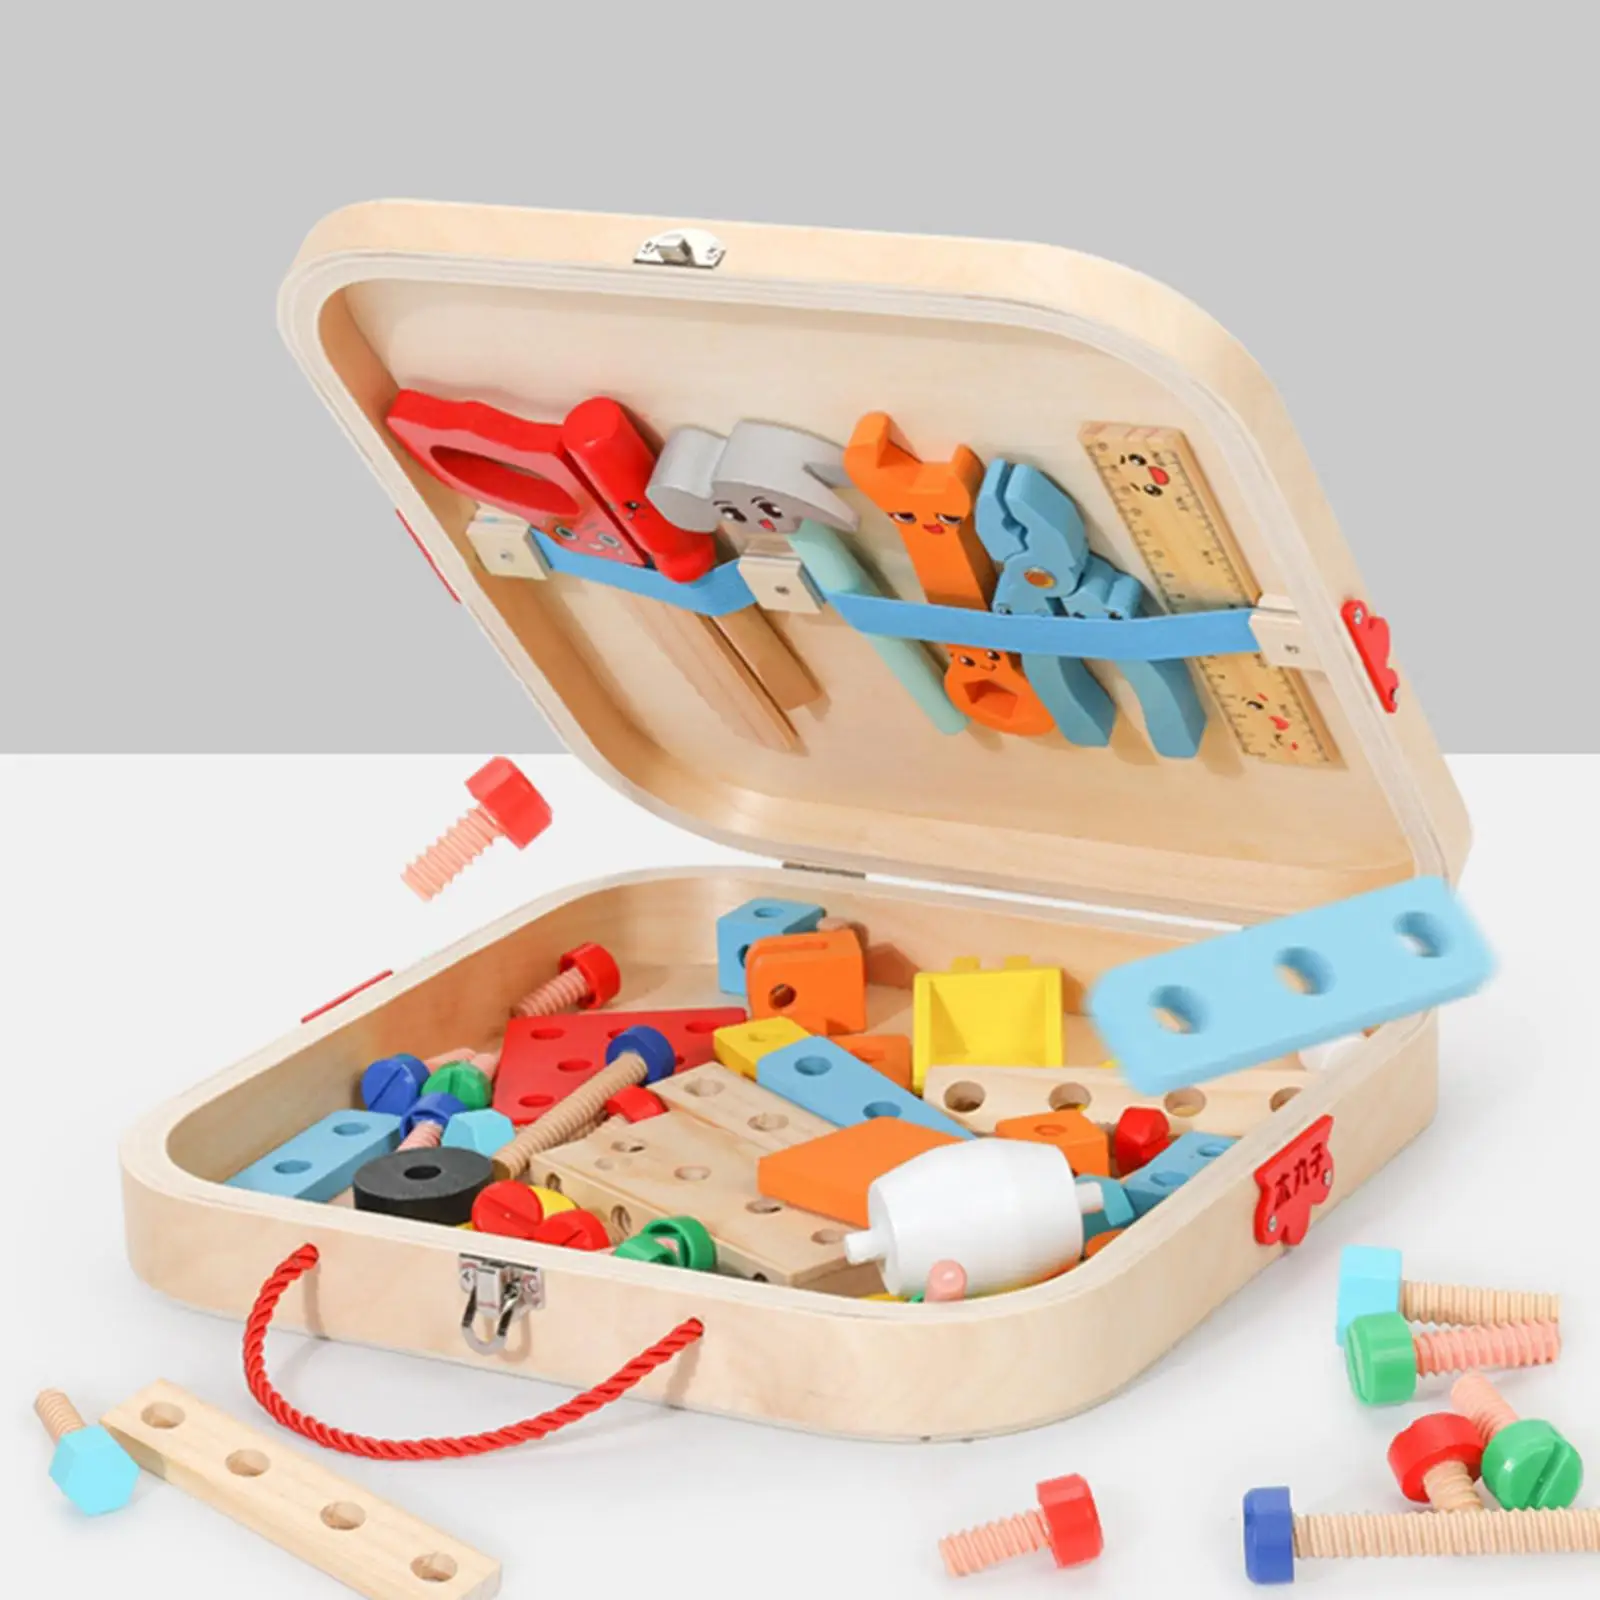 Kids Tool Set Toy Tools Pretend Play Montessori Educational Toy Wooden Tool Box for Living Room Birthday Gift Home DIY Bedroom